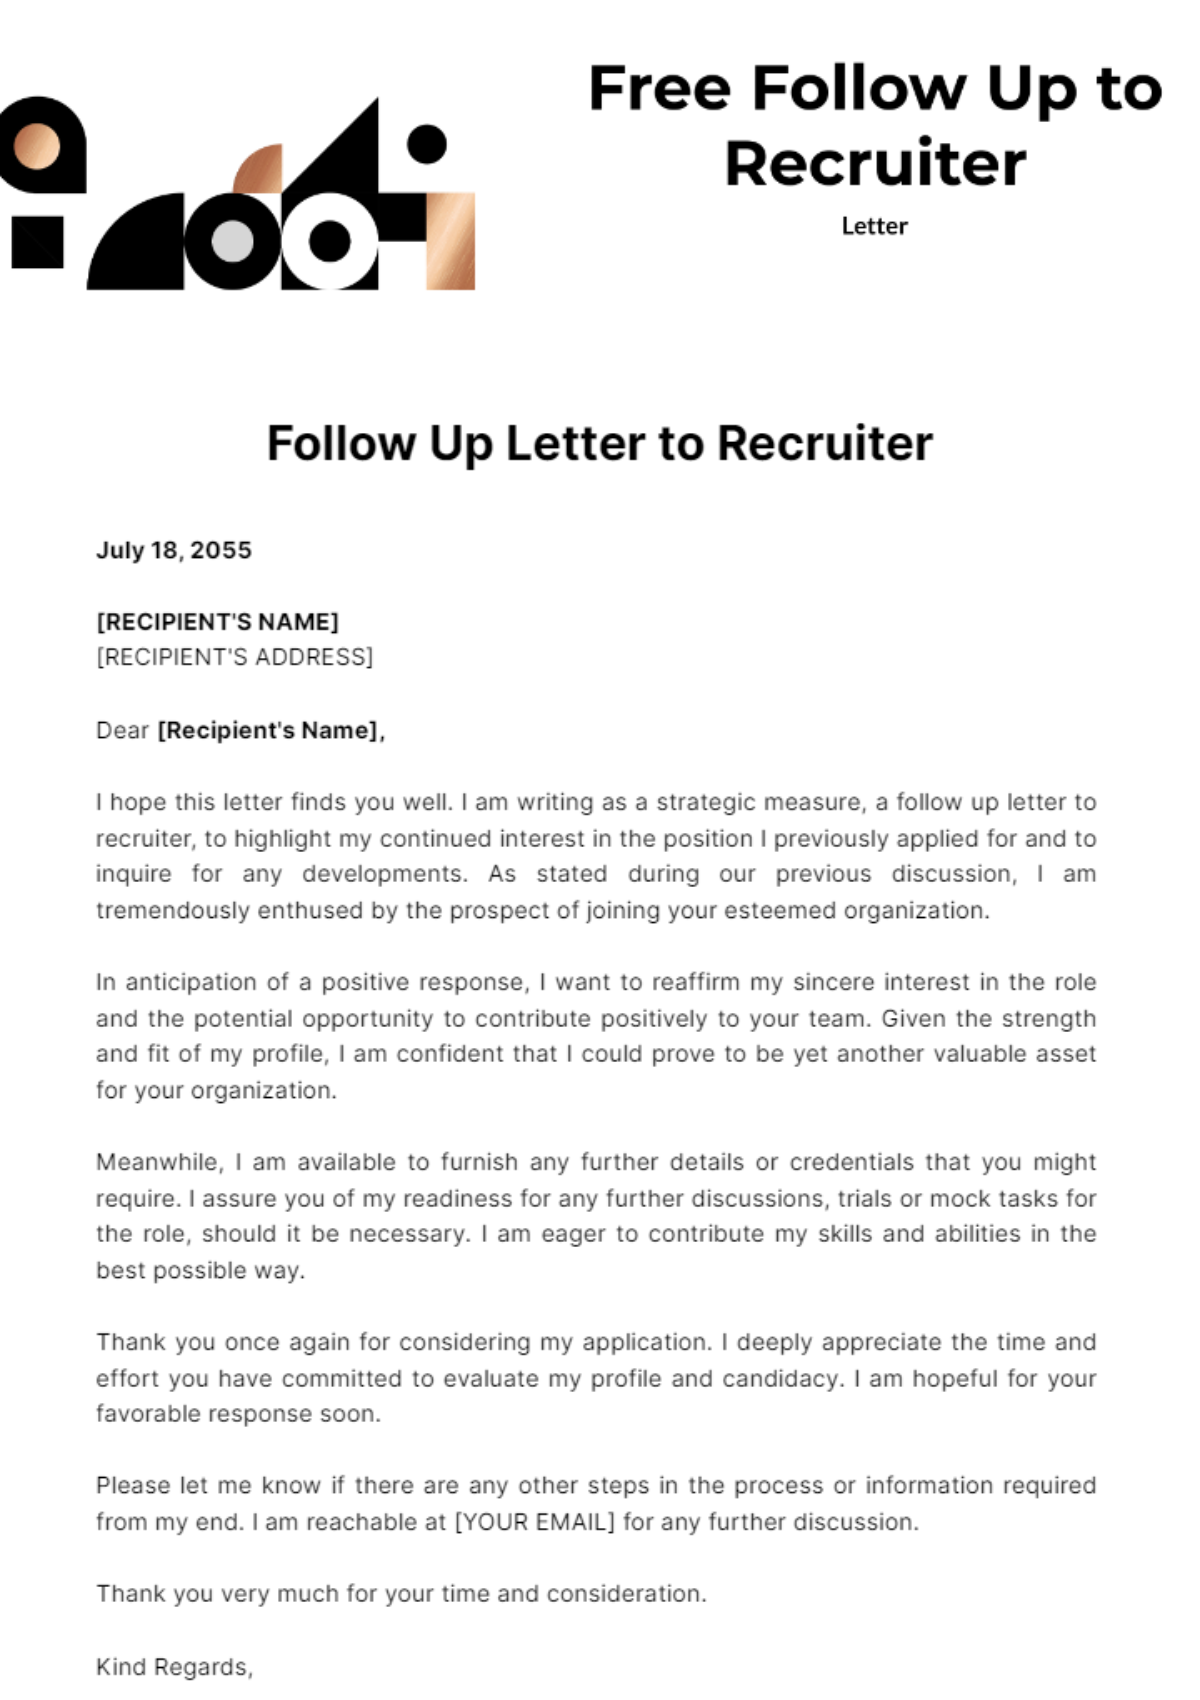 Free Follow Up Letter to Recruiter Template